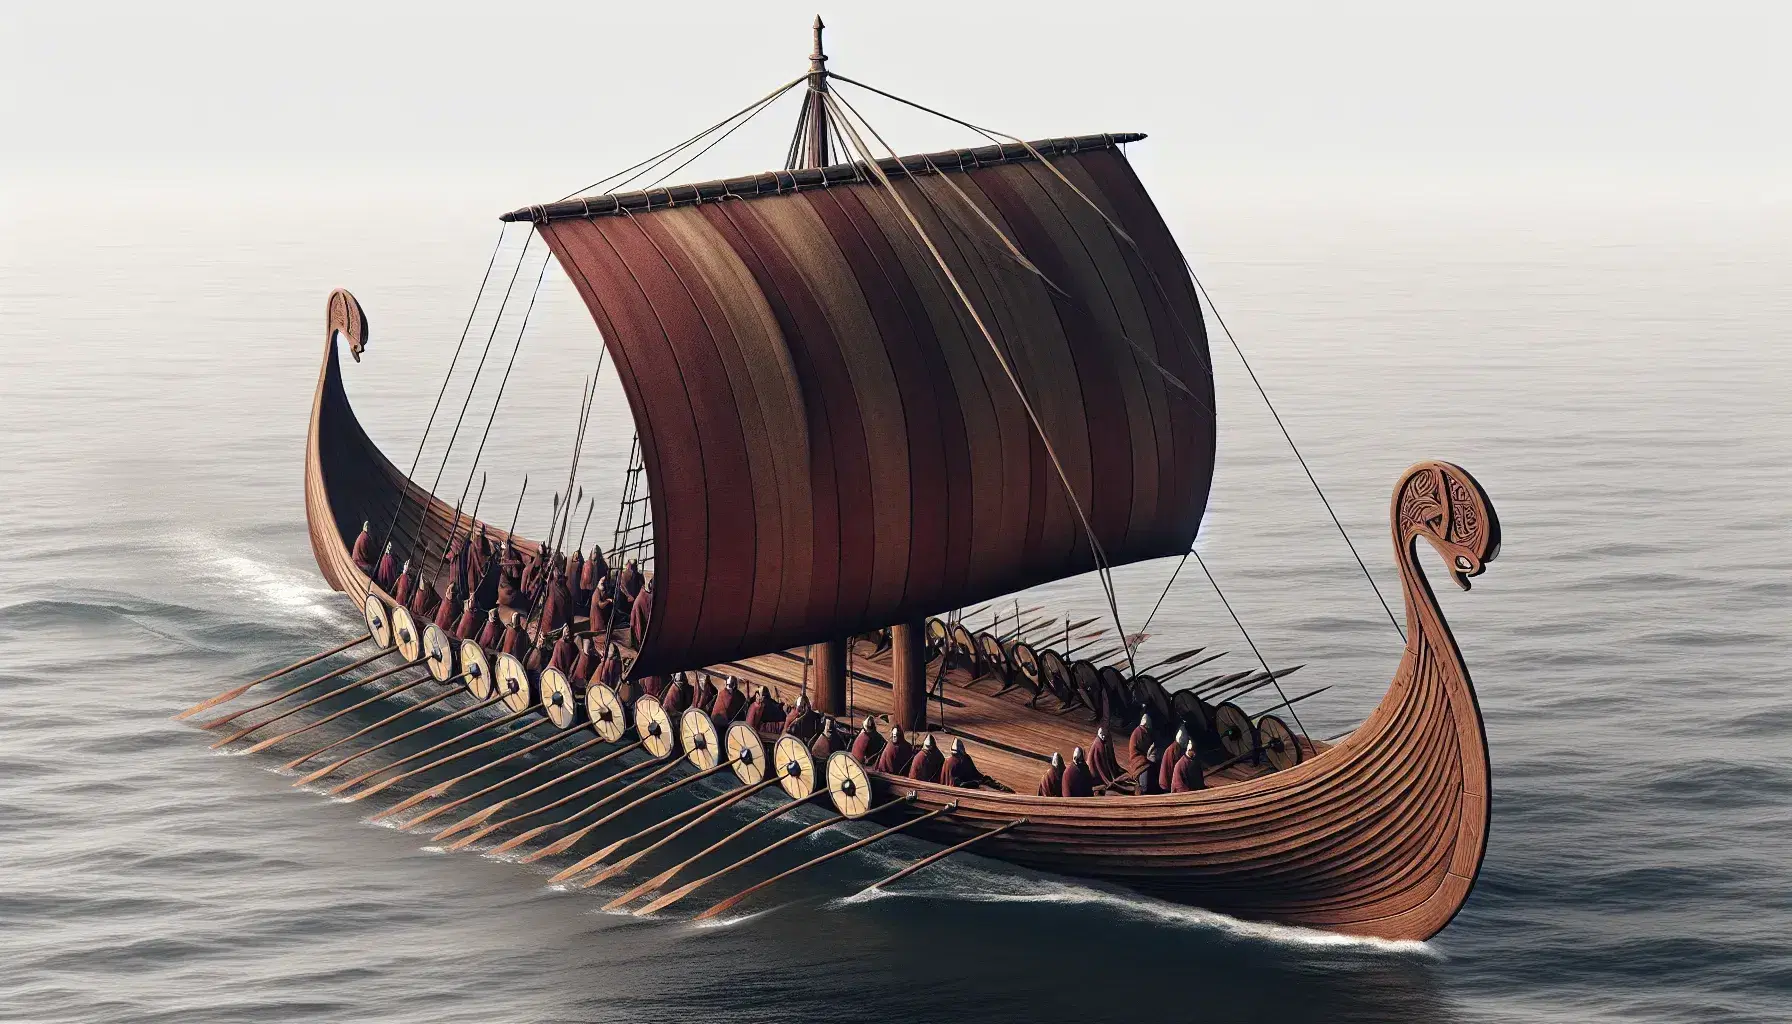 Viking longship with dark wooden hull, red square sail, and yellow-black shields at sea, manned by figures in tunics and iron helmets.